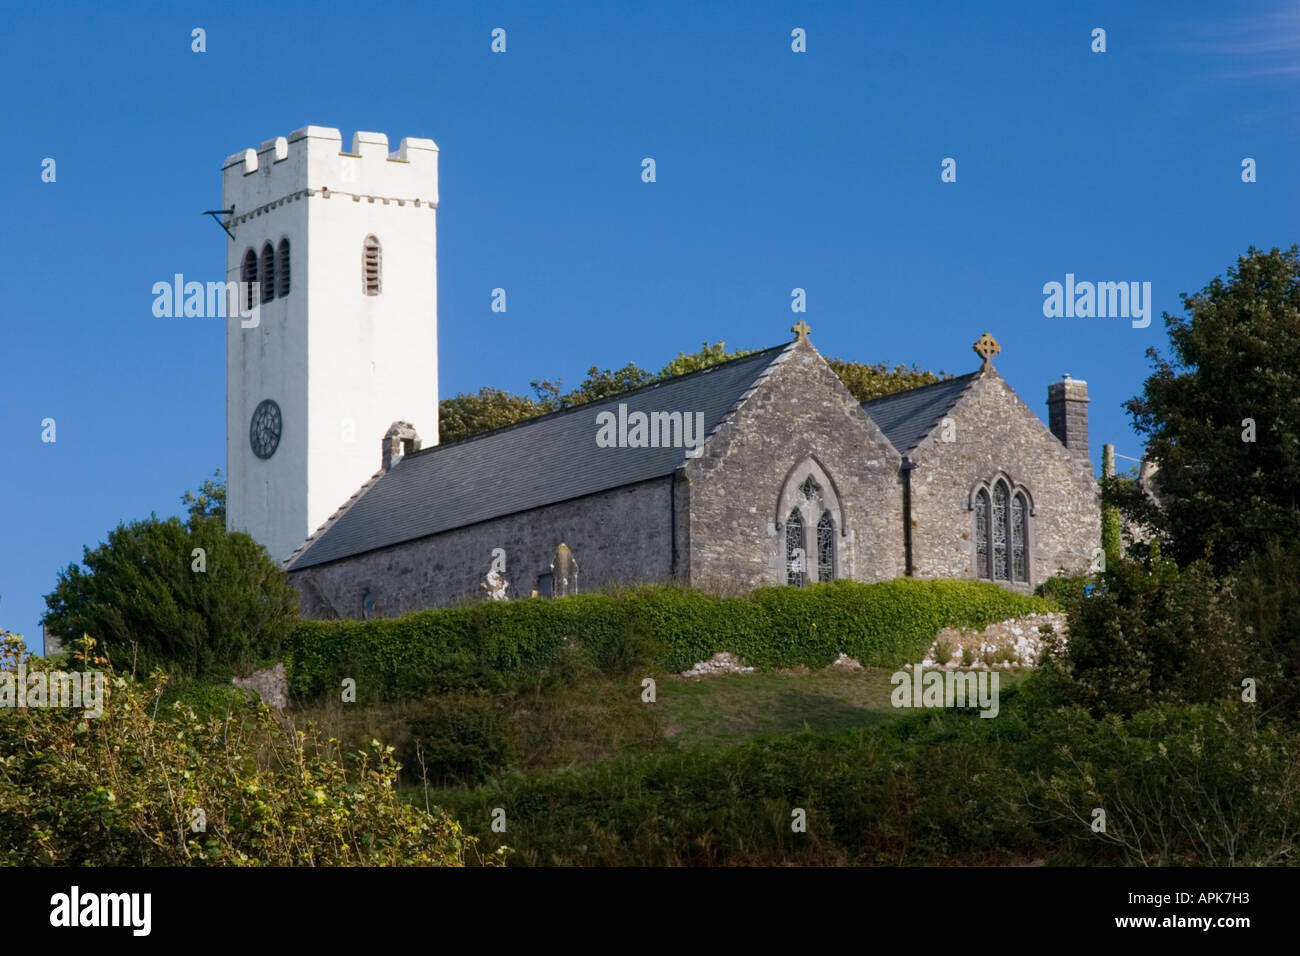 The church with limewash painted white tower at Manorbier in Pembrokeshire Wales Stock Photo